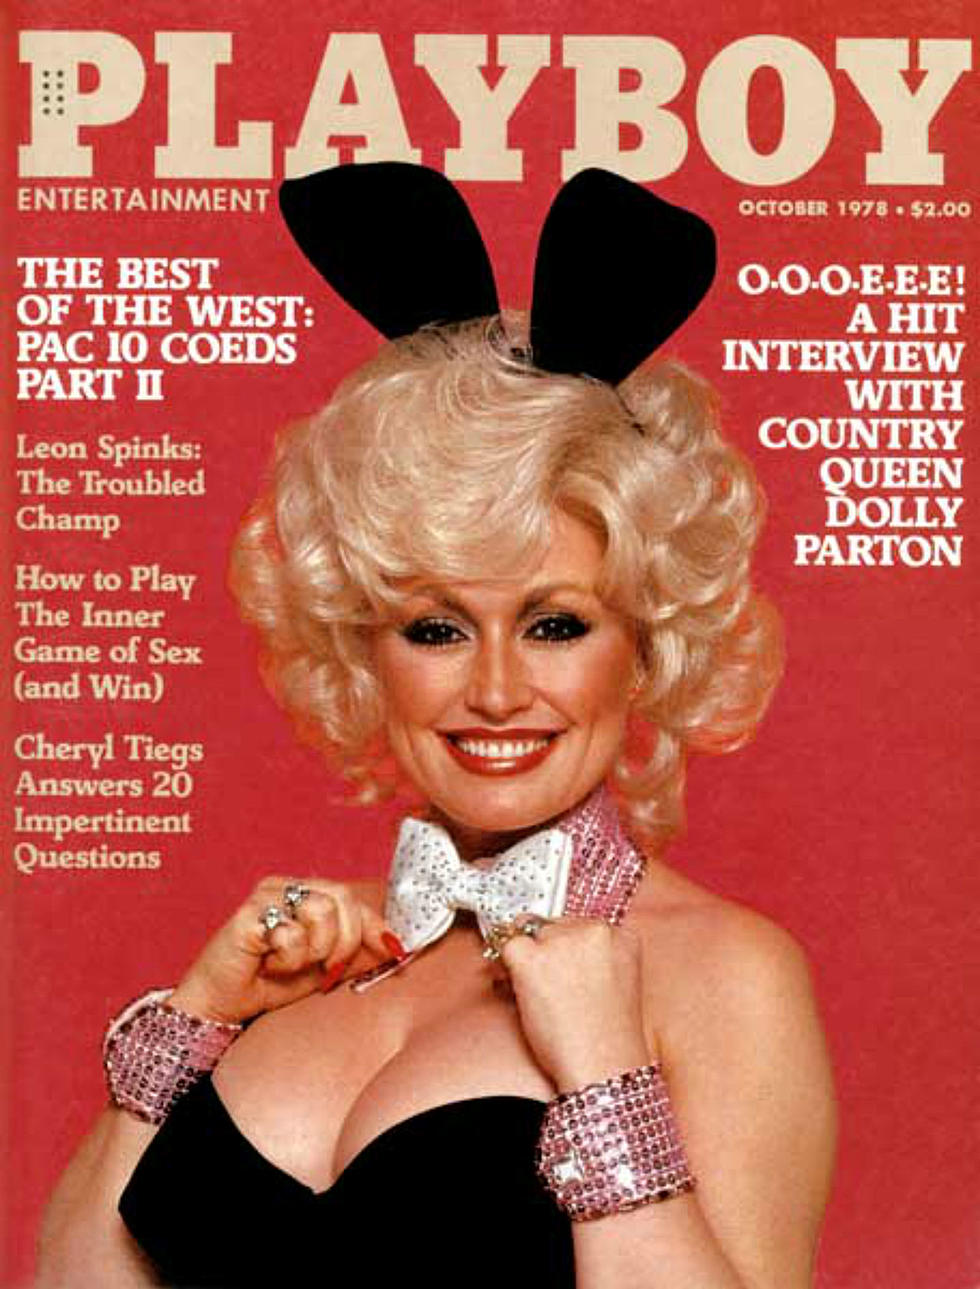 I’ll Never Forget The First Playboy I Ever Saw